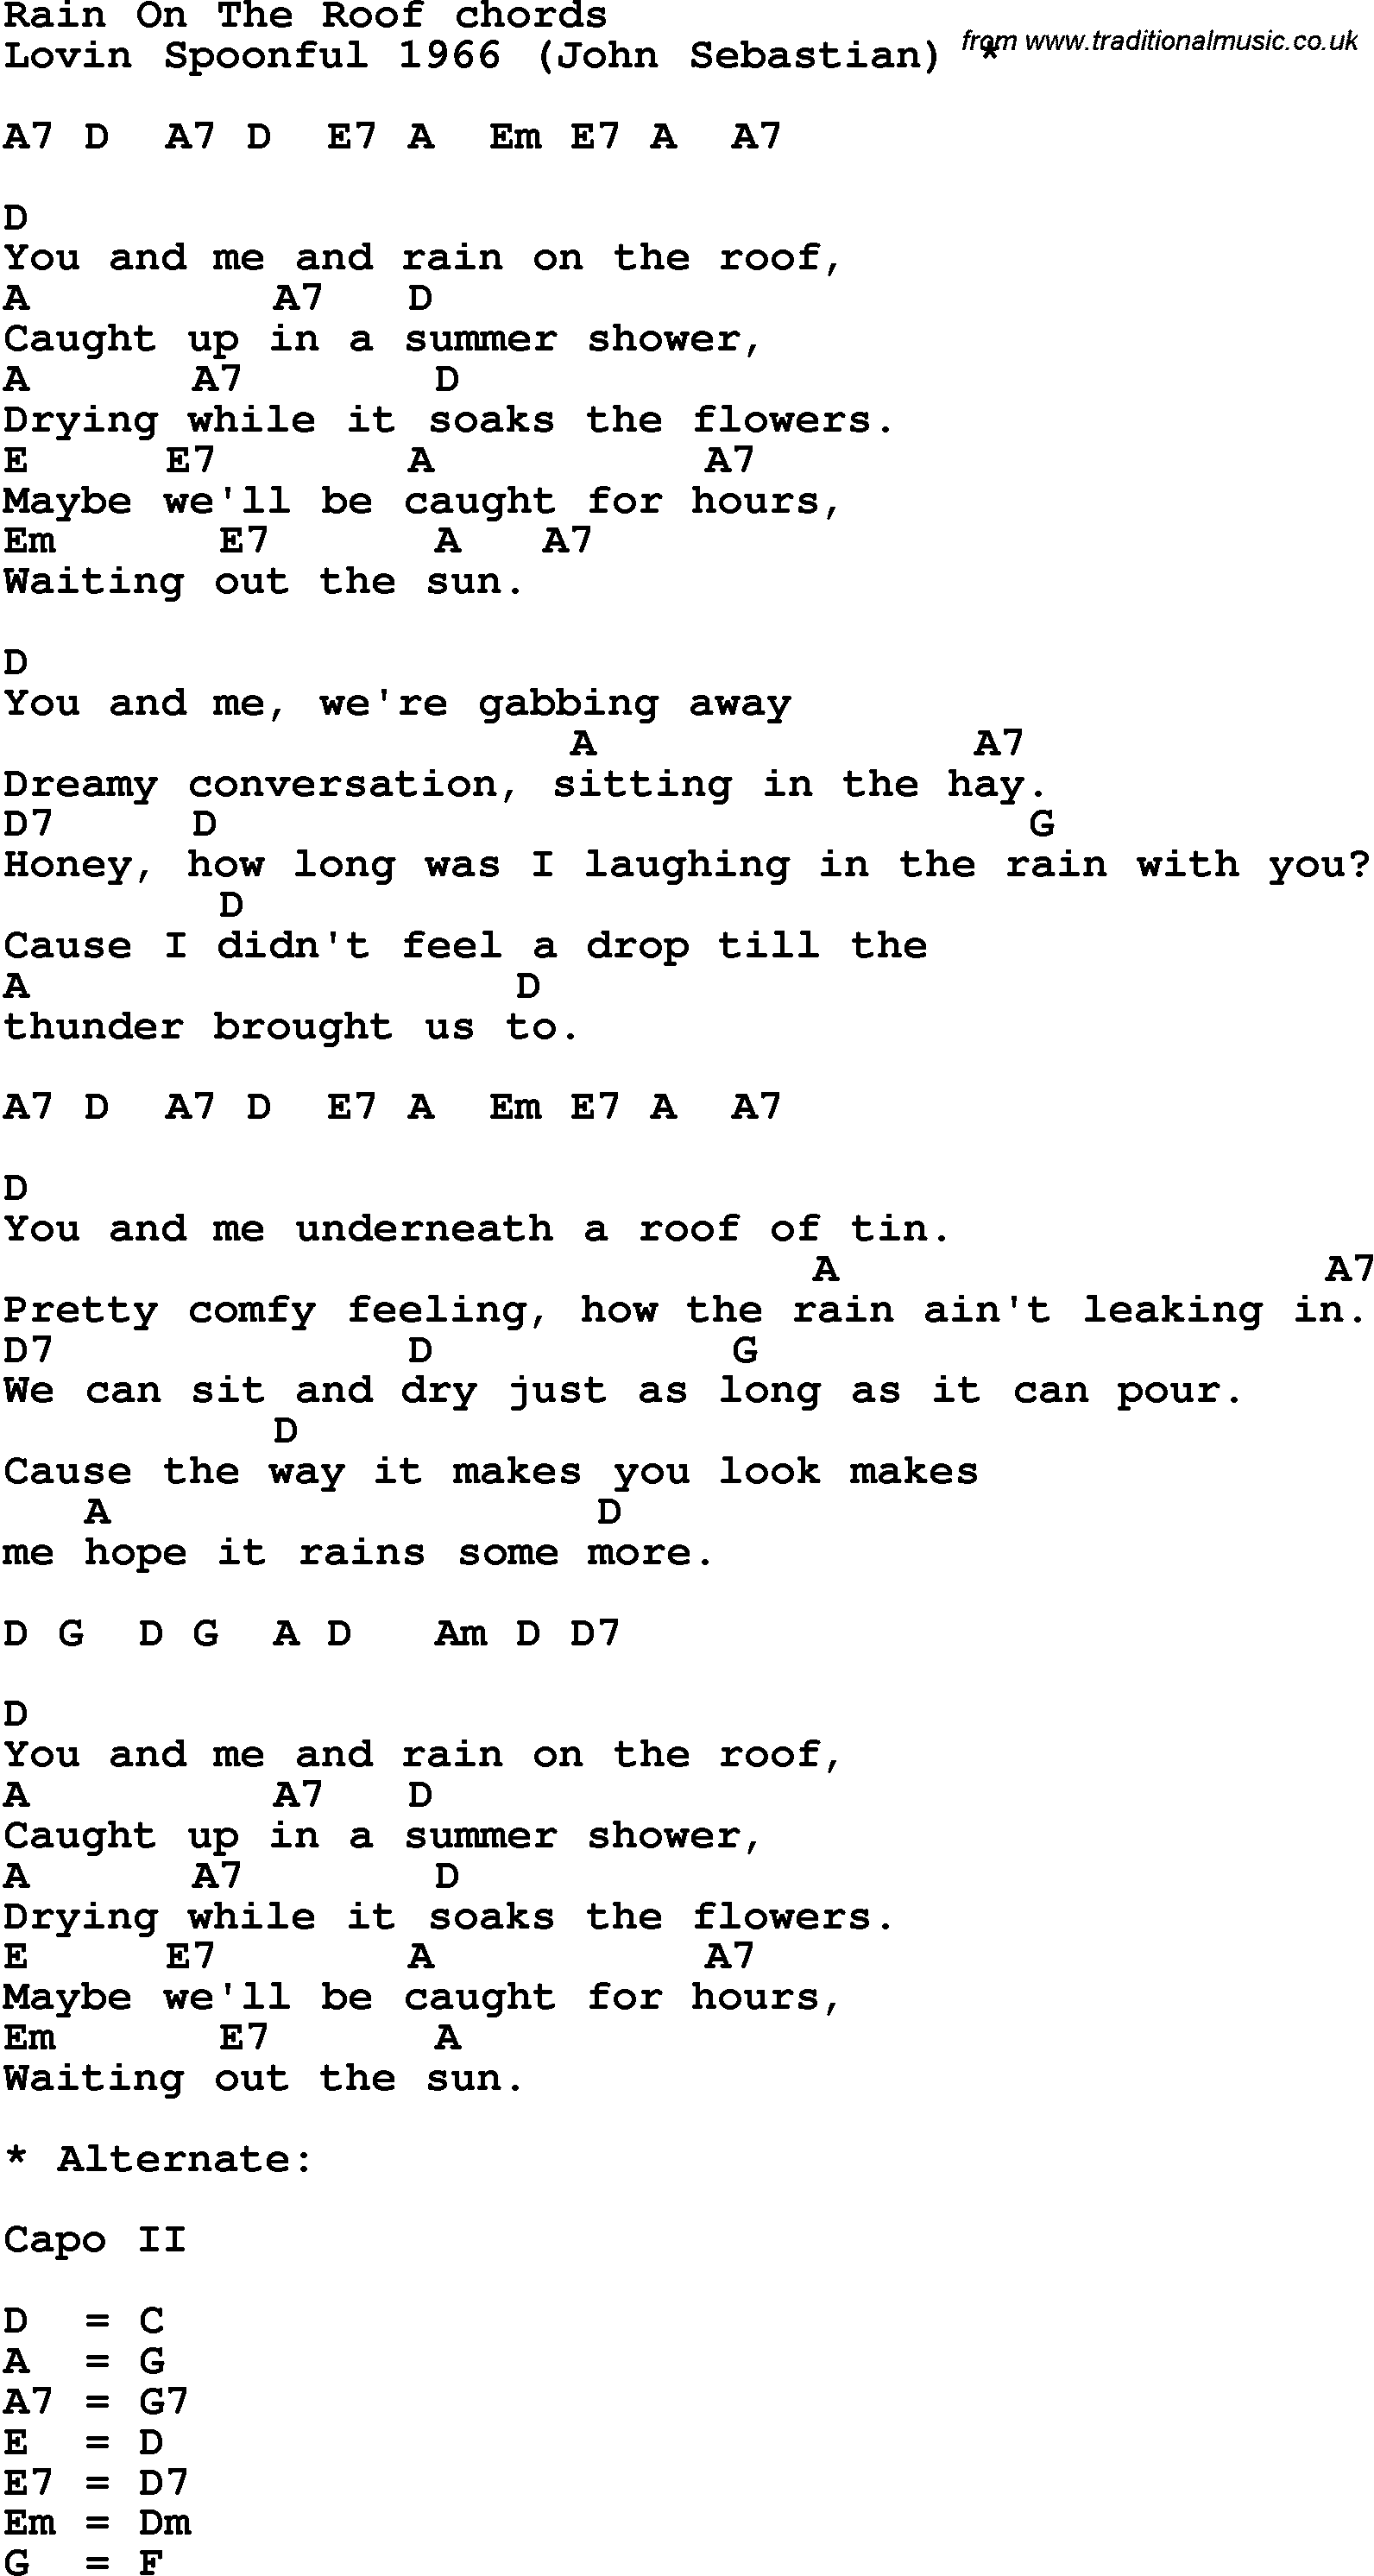 Song Lyrics with guitar chords for Rain On The Roof